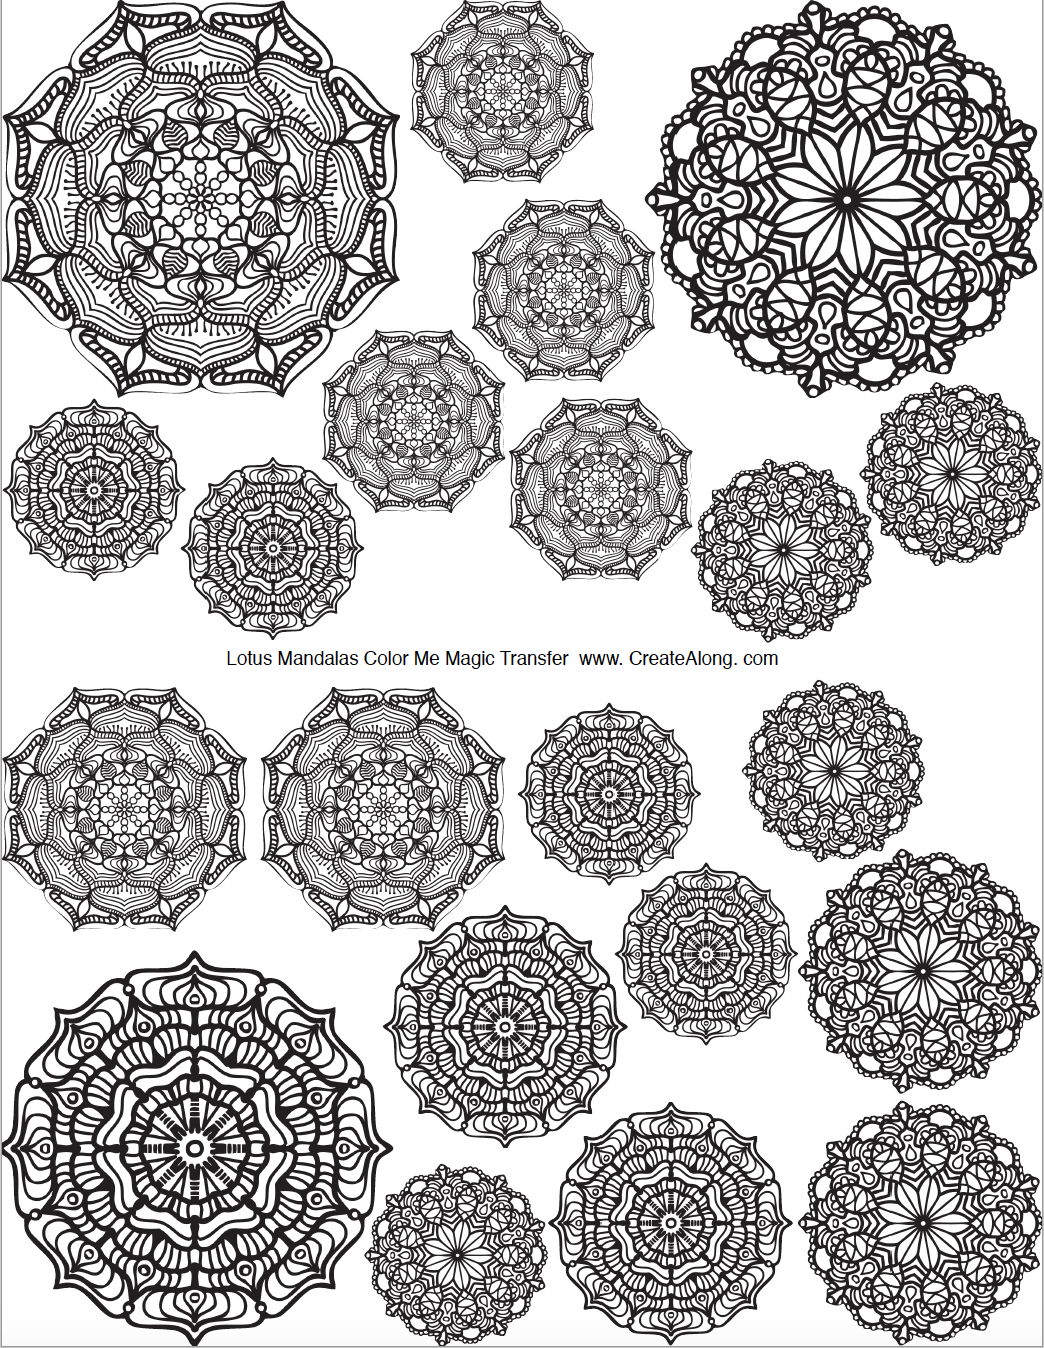 Digital Lotus Mandalas Image Transfer PDF for creating images on raw polymer clay and for use with Magic Transfer Paper